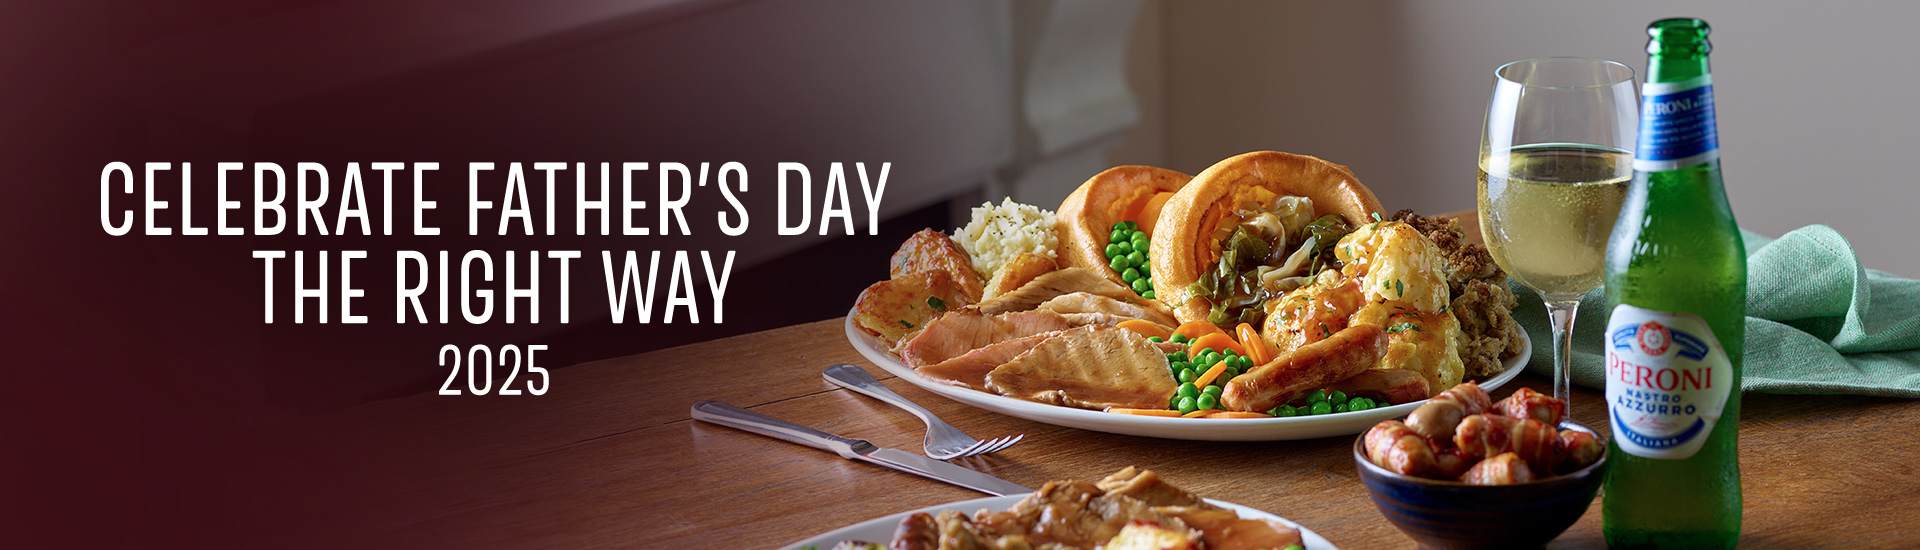 Father’s day carvery in Bexleyheath